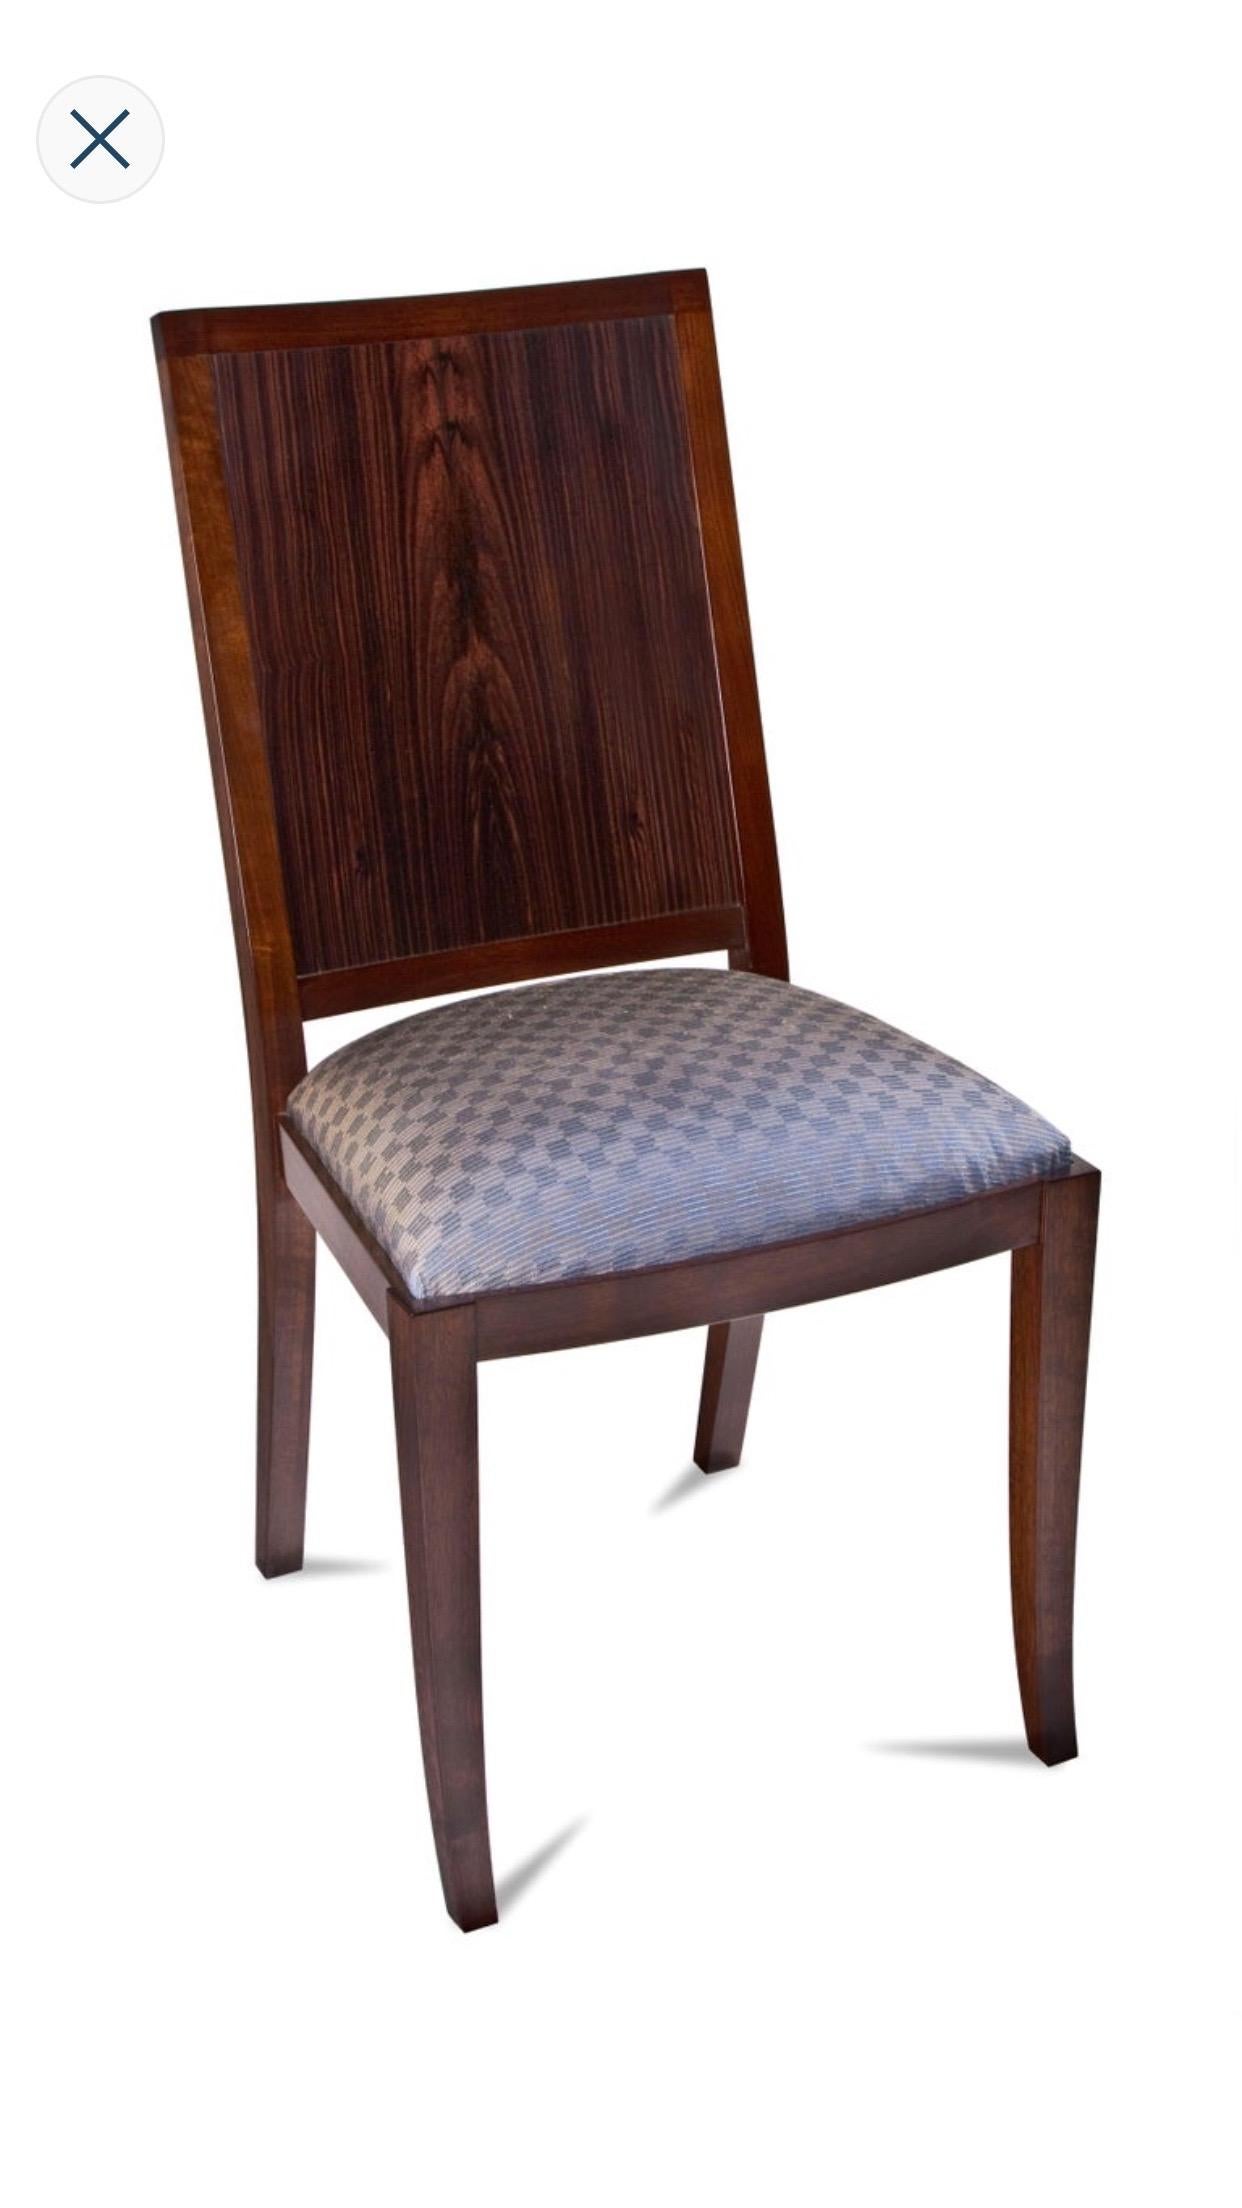 Macassar Ebony and Walnut Dining Chairs In Excellent Condition For Sale In Wilton, CT